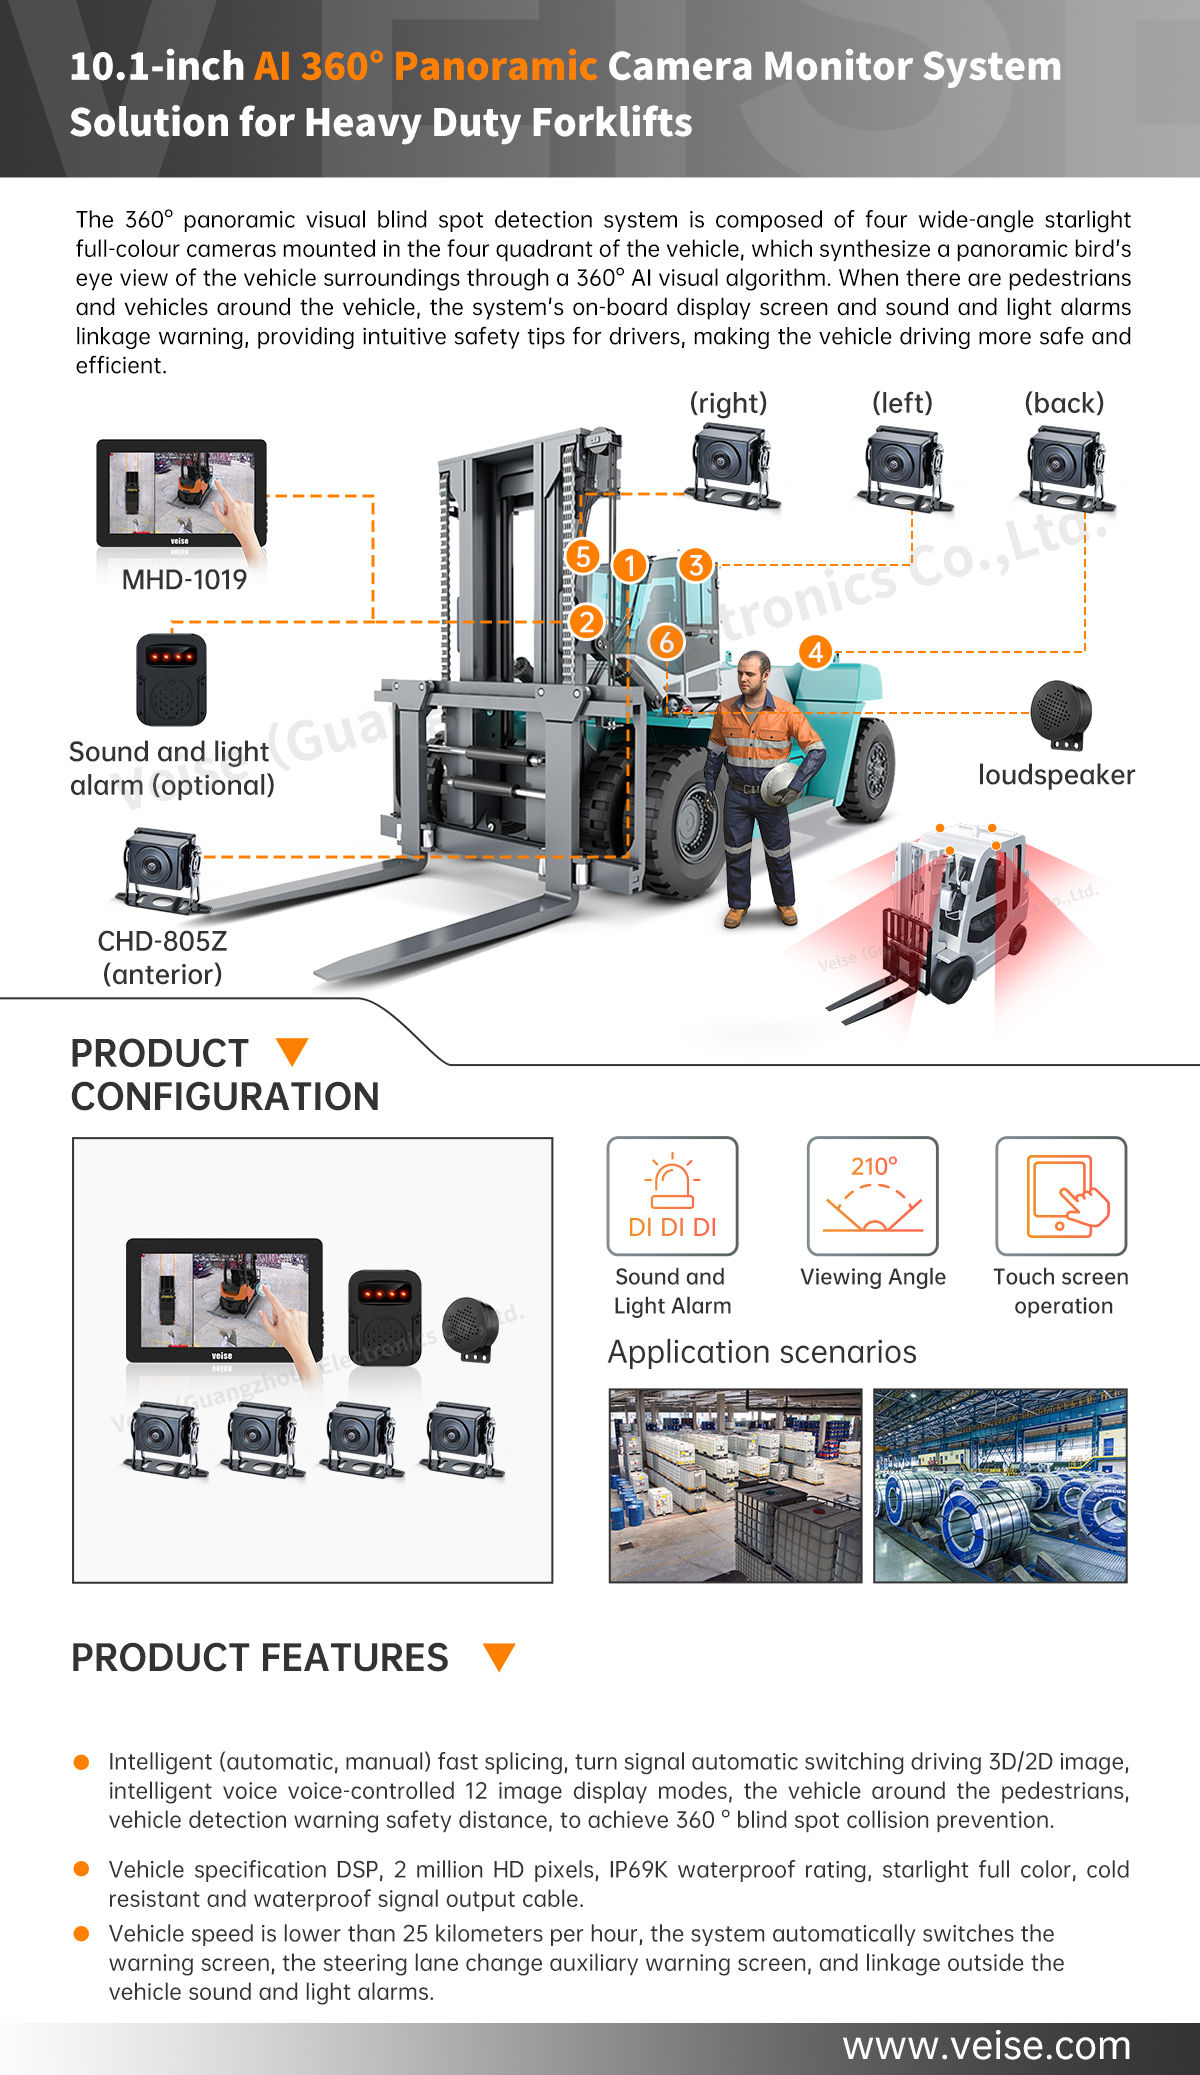 10.1-inch AI 360° Panoramic Camera Monitor System Solution for Heavy Duty Forklifts